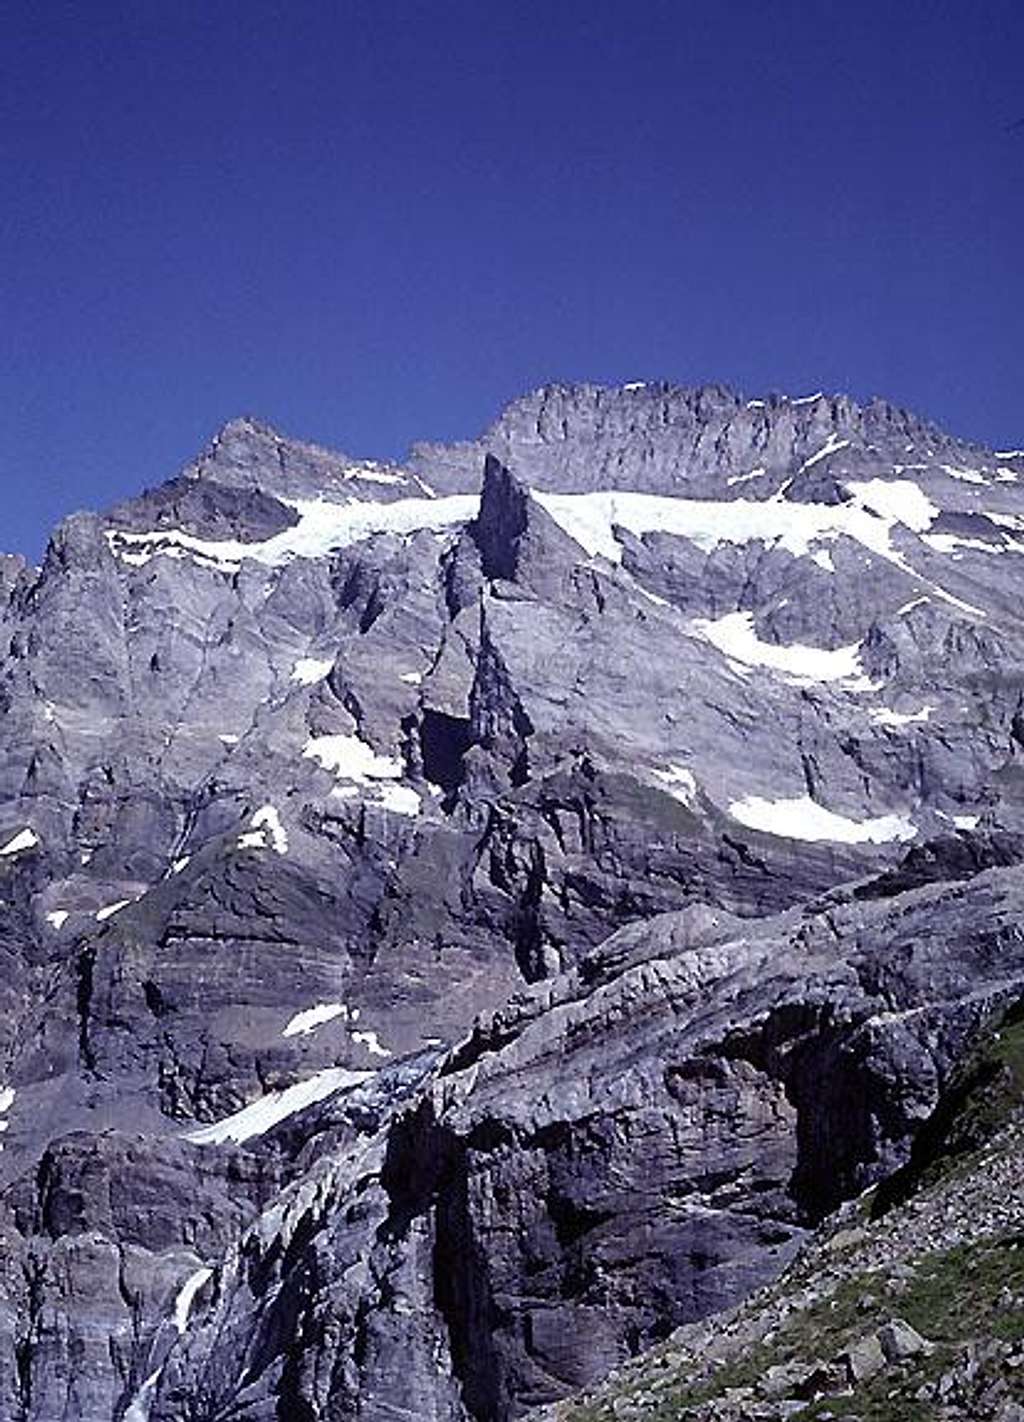 The Fründenhorn from the south.